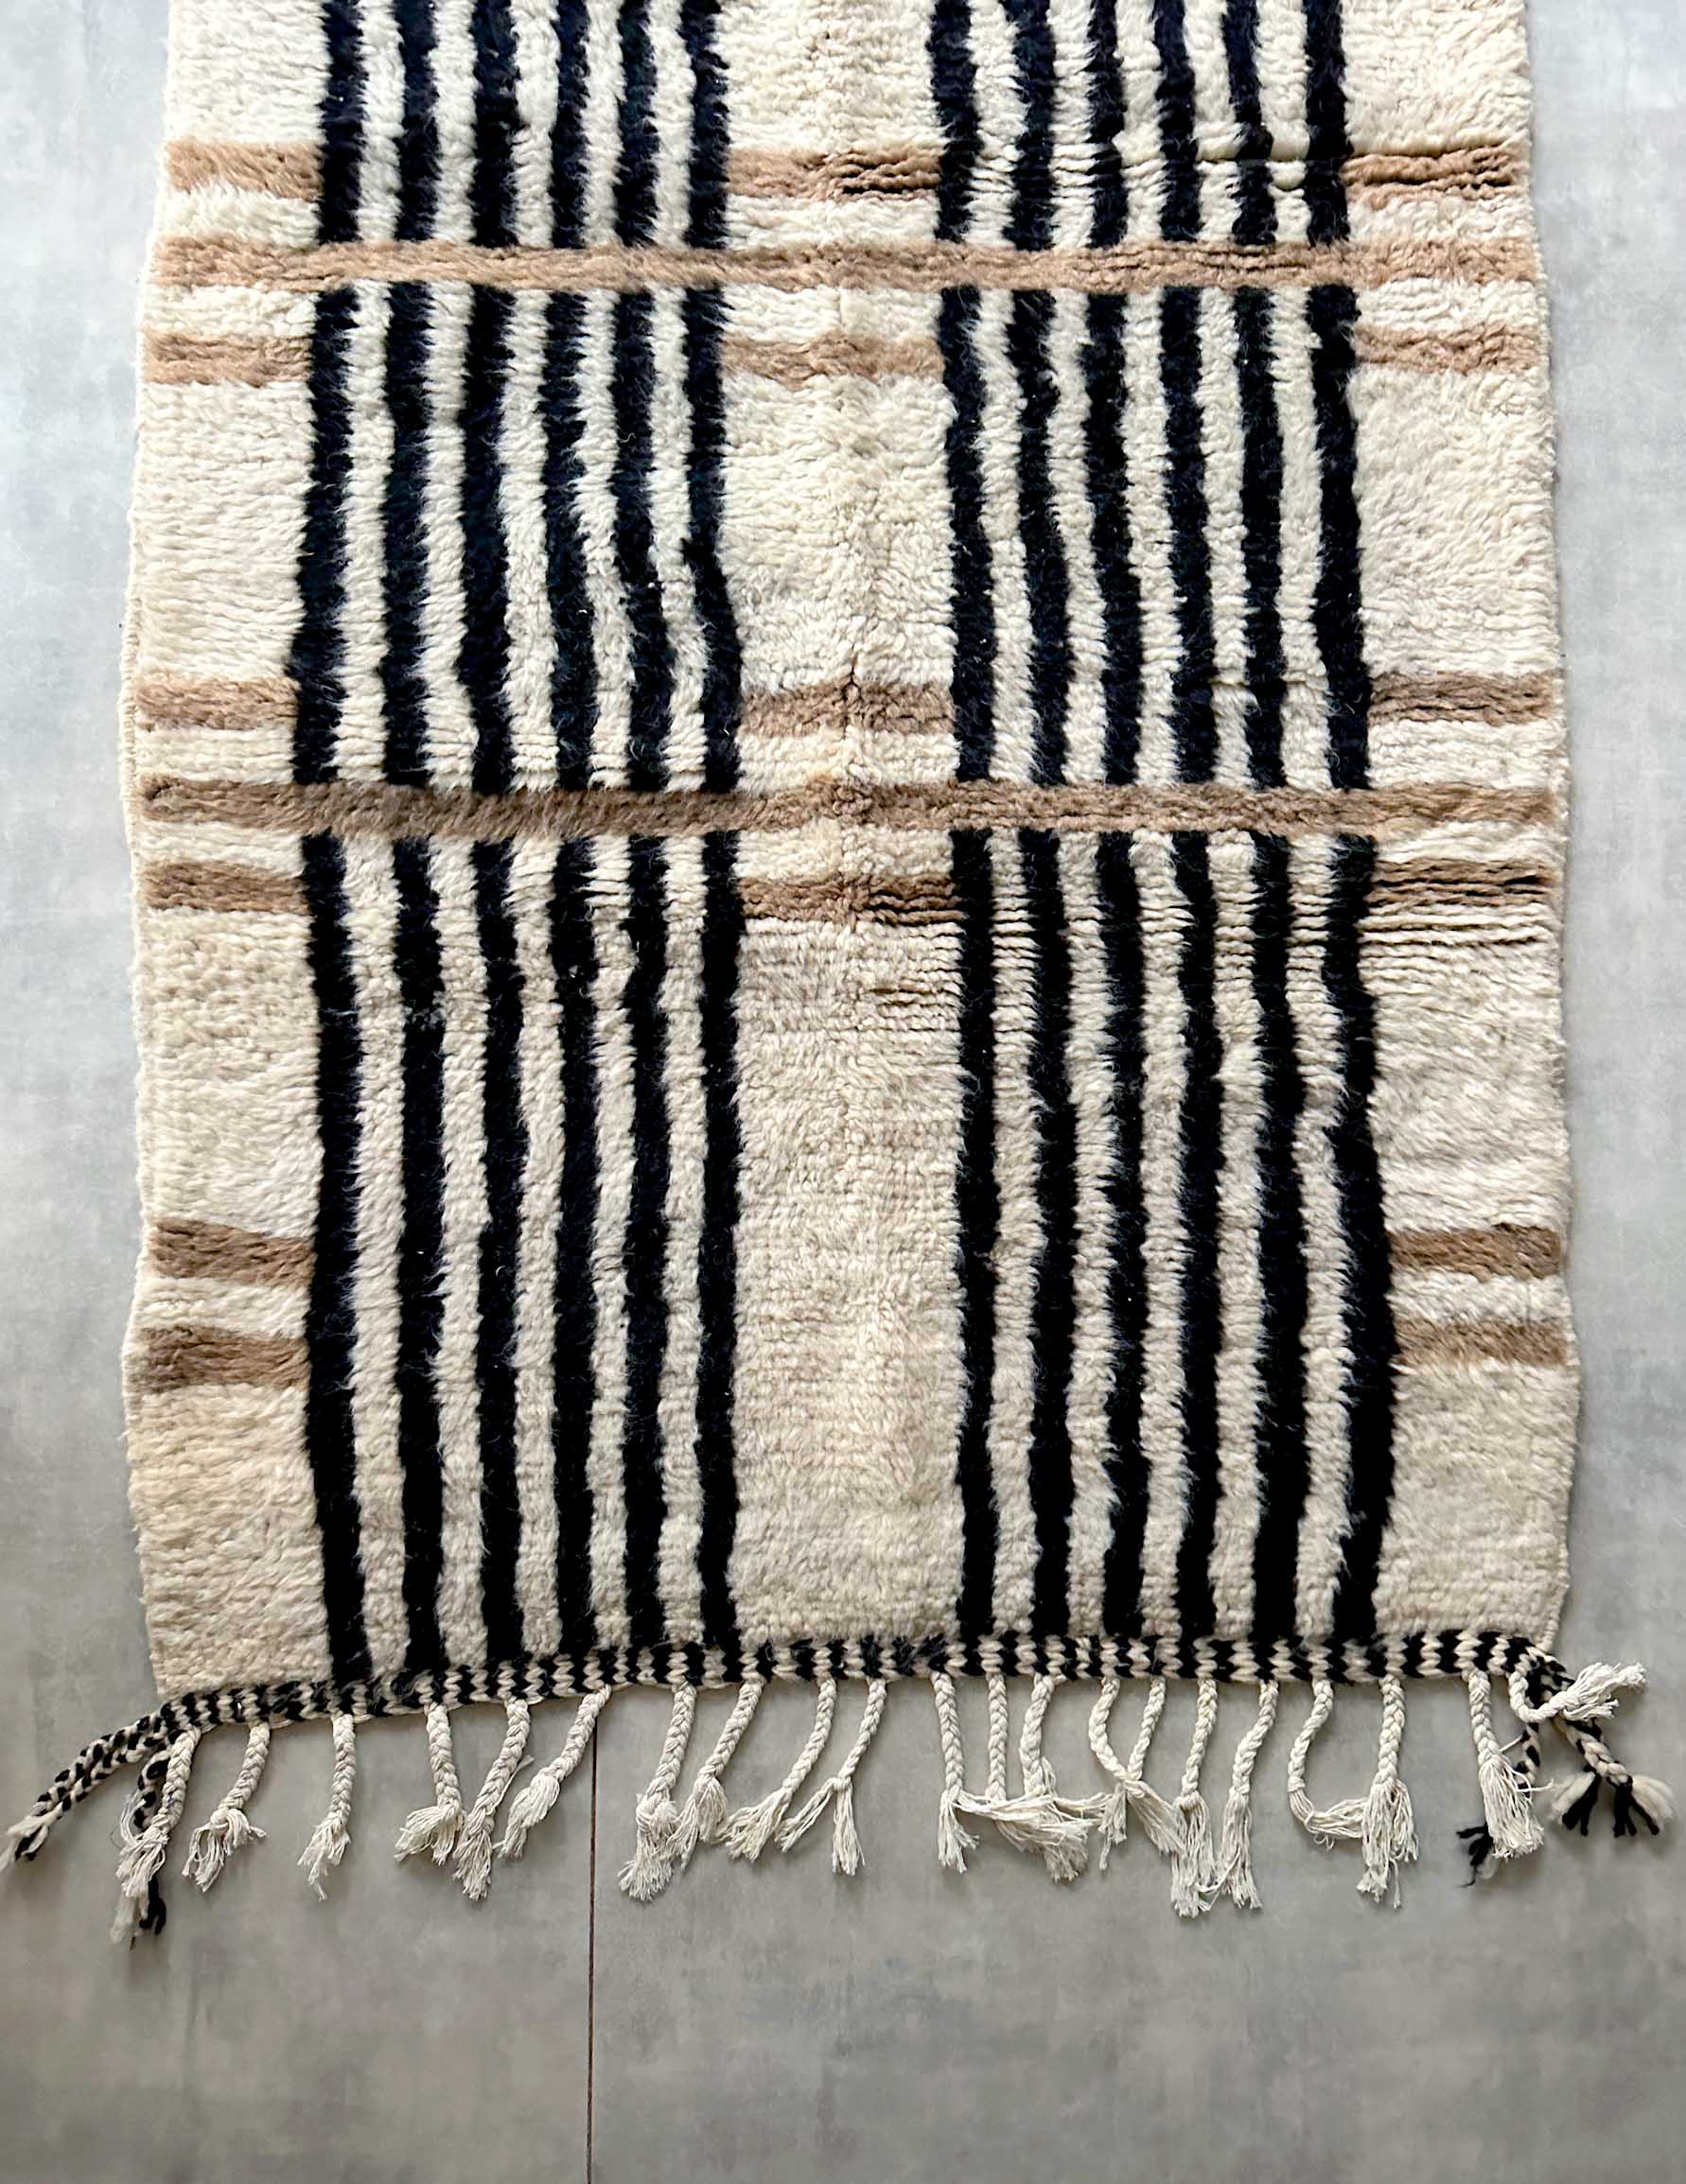 Parallel rug